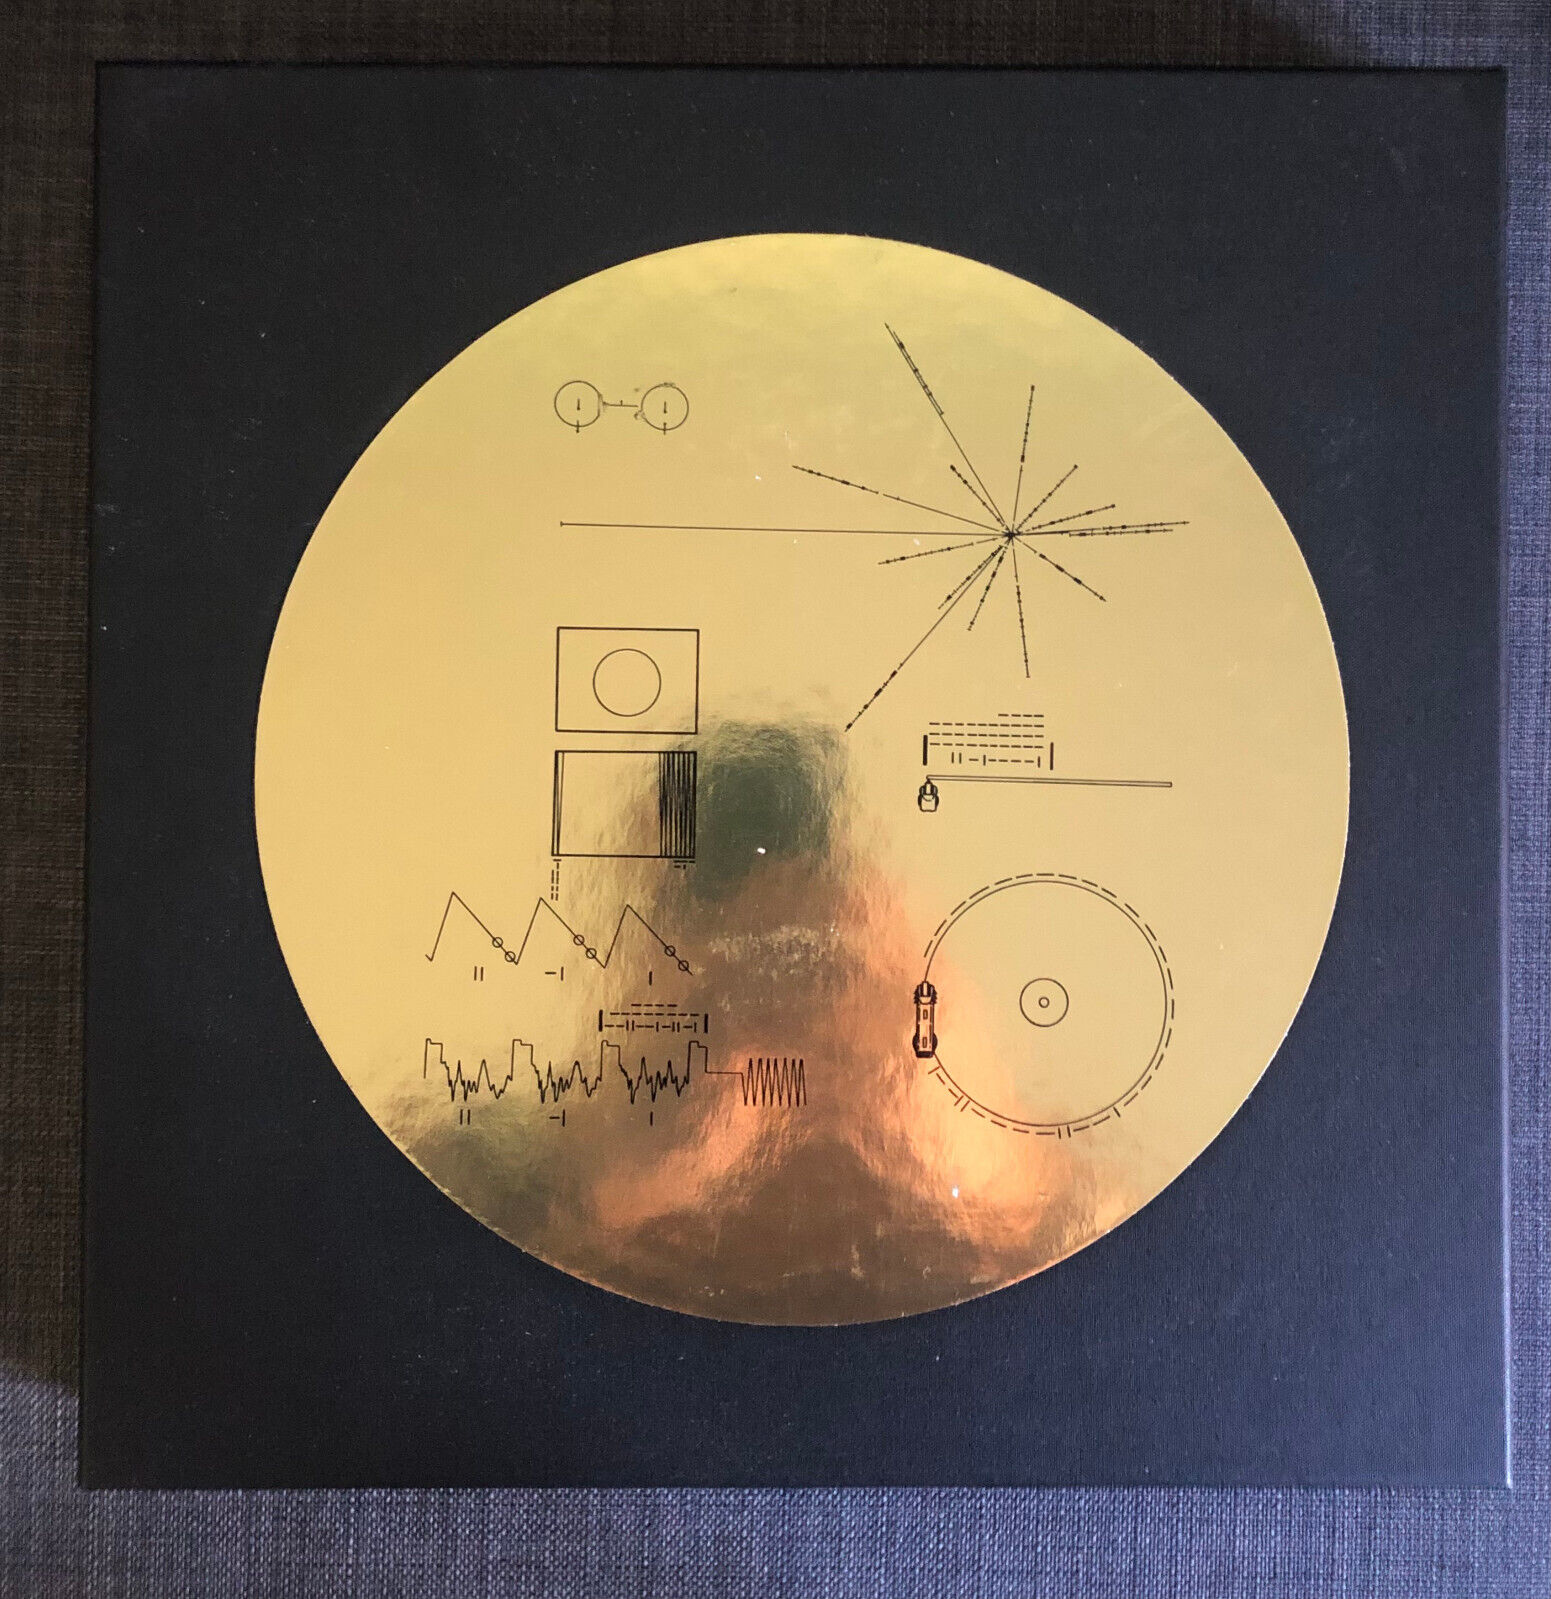 Ozma Voyager Golden Record: Numbered, 1st press, 180 gm 3x gold vinyl LP, boxed